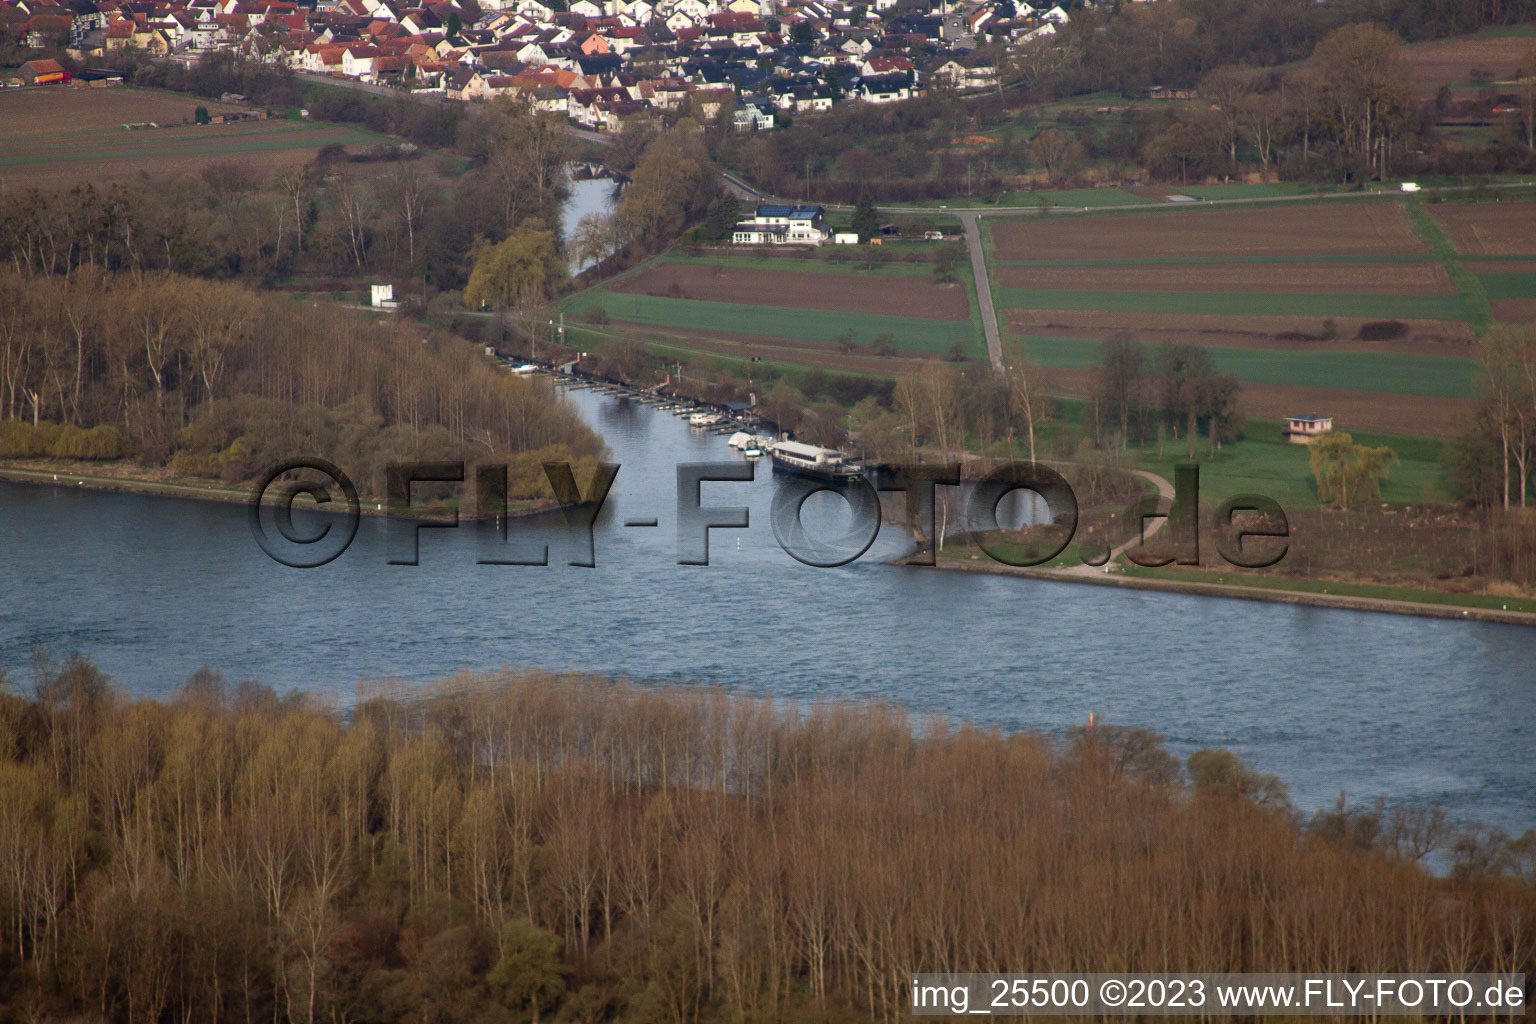 Lautermouth in Neuburg in the state Rhineland-Palatinate, Germany seen from above